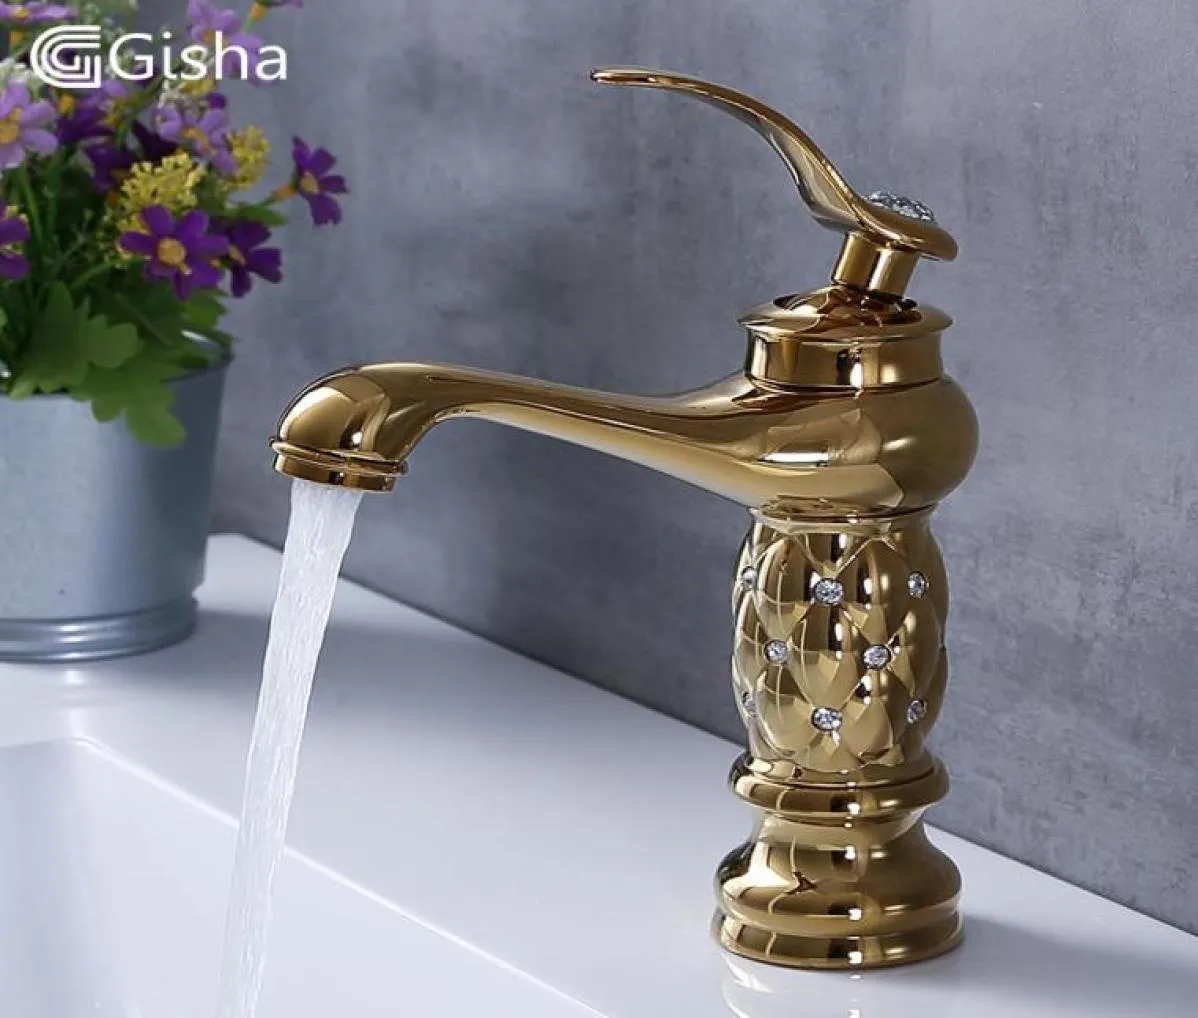 Gisha Bathroom Basin Faucets Classic Brass Diamond Faucet Single Handle And Cold Tap Gold Crystal Mixer Washbasin Faucets T2008370016